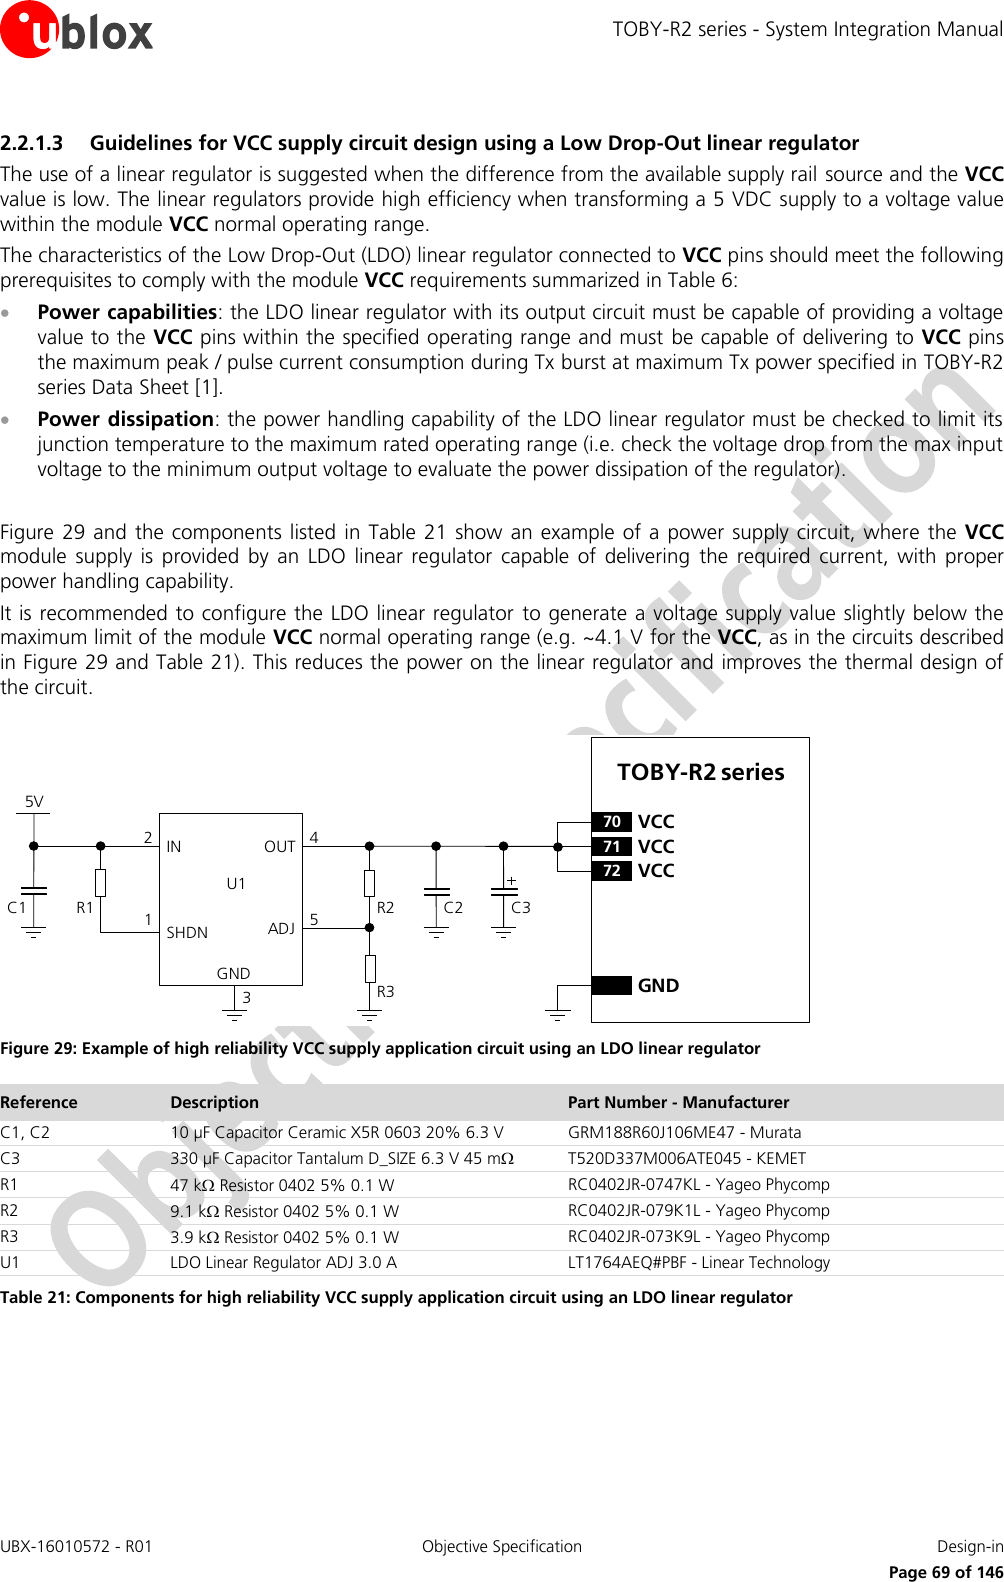 TOBY-R2 series - System Integration Manual UBX-16010572 - R01  Objective Specification  Design-in     Page 69 of 146 2.2.1.3 Guidelines for VCC supply circuit design using a Low Drop-Out linear regulator The use of a linear regulator is suggested when the difference from the available supply rail source and the VCC value is low. The linear regulators provide high efficiency when transforming a 5 VDC supply to a voltage value within the module VCC normal operating range. The characteristics of the Low Drop-Out (LDO) linear regulator connected to VCC pins should meet the following prerequisites to comply with the module VCC requirements summarized in Table 6:  Power capabilities: the LDO linear regulator with its output circuit must be capable of providing a voltage value to the VCC pins within the specified operating range and must  be capable of delivering to VCC pins the maximum peak / pulse current consumption during Tx burst at maximum Tx power specified in TOBY-R2 series Data Sheet [1].  Power dissipation: the power handling capability of the LDO linear regulator must be checked to limit its junction temperature to the maximum rated operating range (i.e. check the voltage drop from the max input voltage to the minimum output voltage to evaluate the power dissipation of the regulator).  Figure 29 and  the  components  listed  in Table 21  show  an example of a power  supply  circuit, where the  VCC module  supply  is  provided  by  an  LDO  linear  regulator  capable  of  delivering  the  required  current,  with proper power handling capability. It is recommended to configure the LDO linear regulator  to generate a voltage supply value slightly below the maximum limit of the module VCC normal operating range (e.g. ~4.1 V for the VCC, as in the circuits described in Figure 29 and Table 21). This reduces the power on the linear regulator and improves the thermal design of the circuit.  5VC1 R1IN OUTADJGND12453C2R2R3U1SHDNTOBY-R2 series71 VCC72 VCC70 VCCGNDC3 Figure 29: Example of high reliability VCC supply application circuit using an LDO linear regulator Reference Description Part Number - Manufacturer C1, C2 10 µF Capacitor Ceramic X5R 0603 20% 6.3 V GRM188R60J106ME47 - Murata C3 330 µF Capacitor Tantalum D_SIZE 6.3 V 45 m T520D337M006ATE045 - KEMET R1 47 k Resistor 0402 5% 0.1 W RC0402JR-0747KL - Yageo Phycomp R2 9.1 k Resistor 0402 5% 0.1 W RC0402JR-079K1L - Yageo Phycomp R3 3.9 k Resistor 0402 5% 0.1 W RC0402JR-073K9L - Yageo Phycomp U1 LDO Linear Regulator ADJ 3.0 A LT1764AEQ#PBF - Linear Technology Table 21: Components for high reliability VCC supply application circuit using an LDO linear regulator 